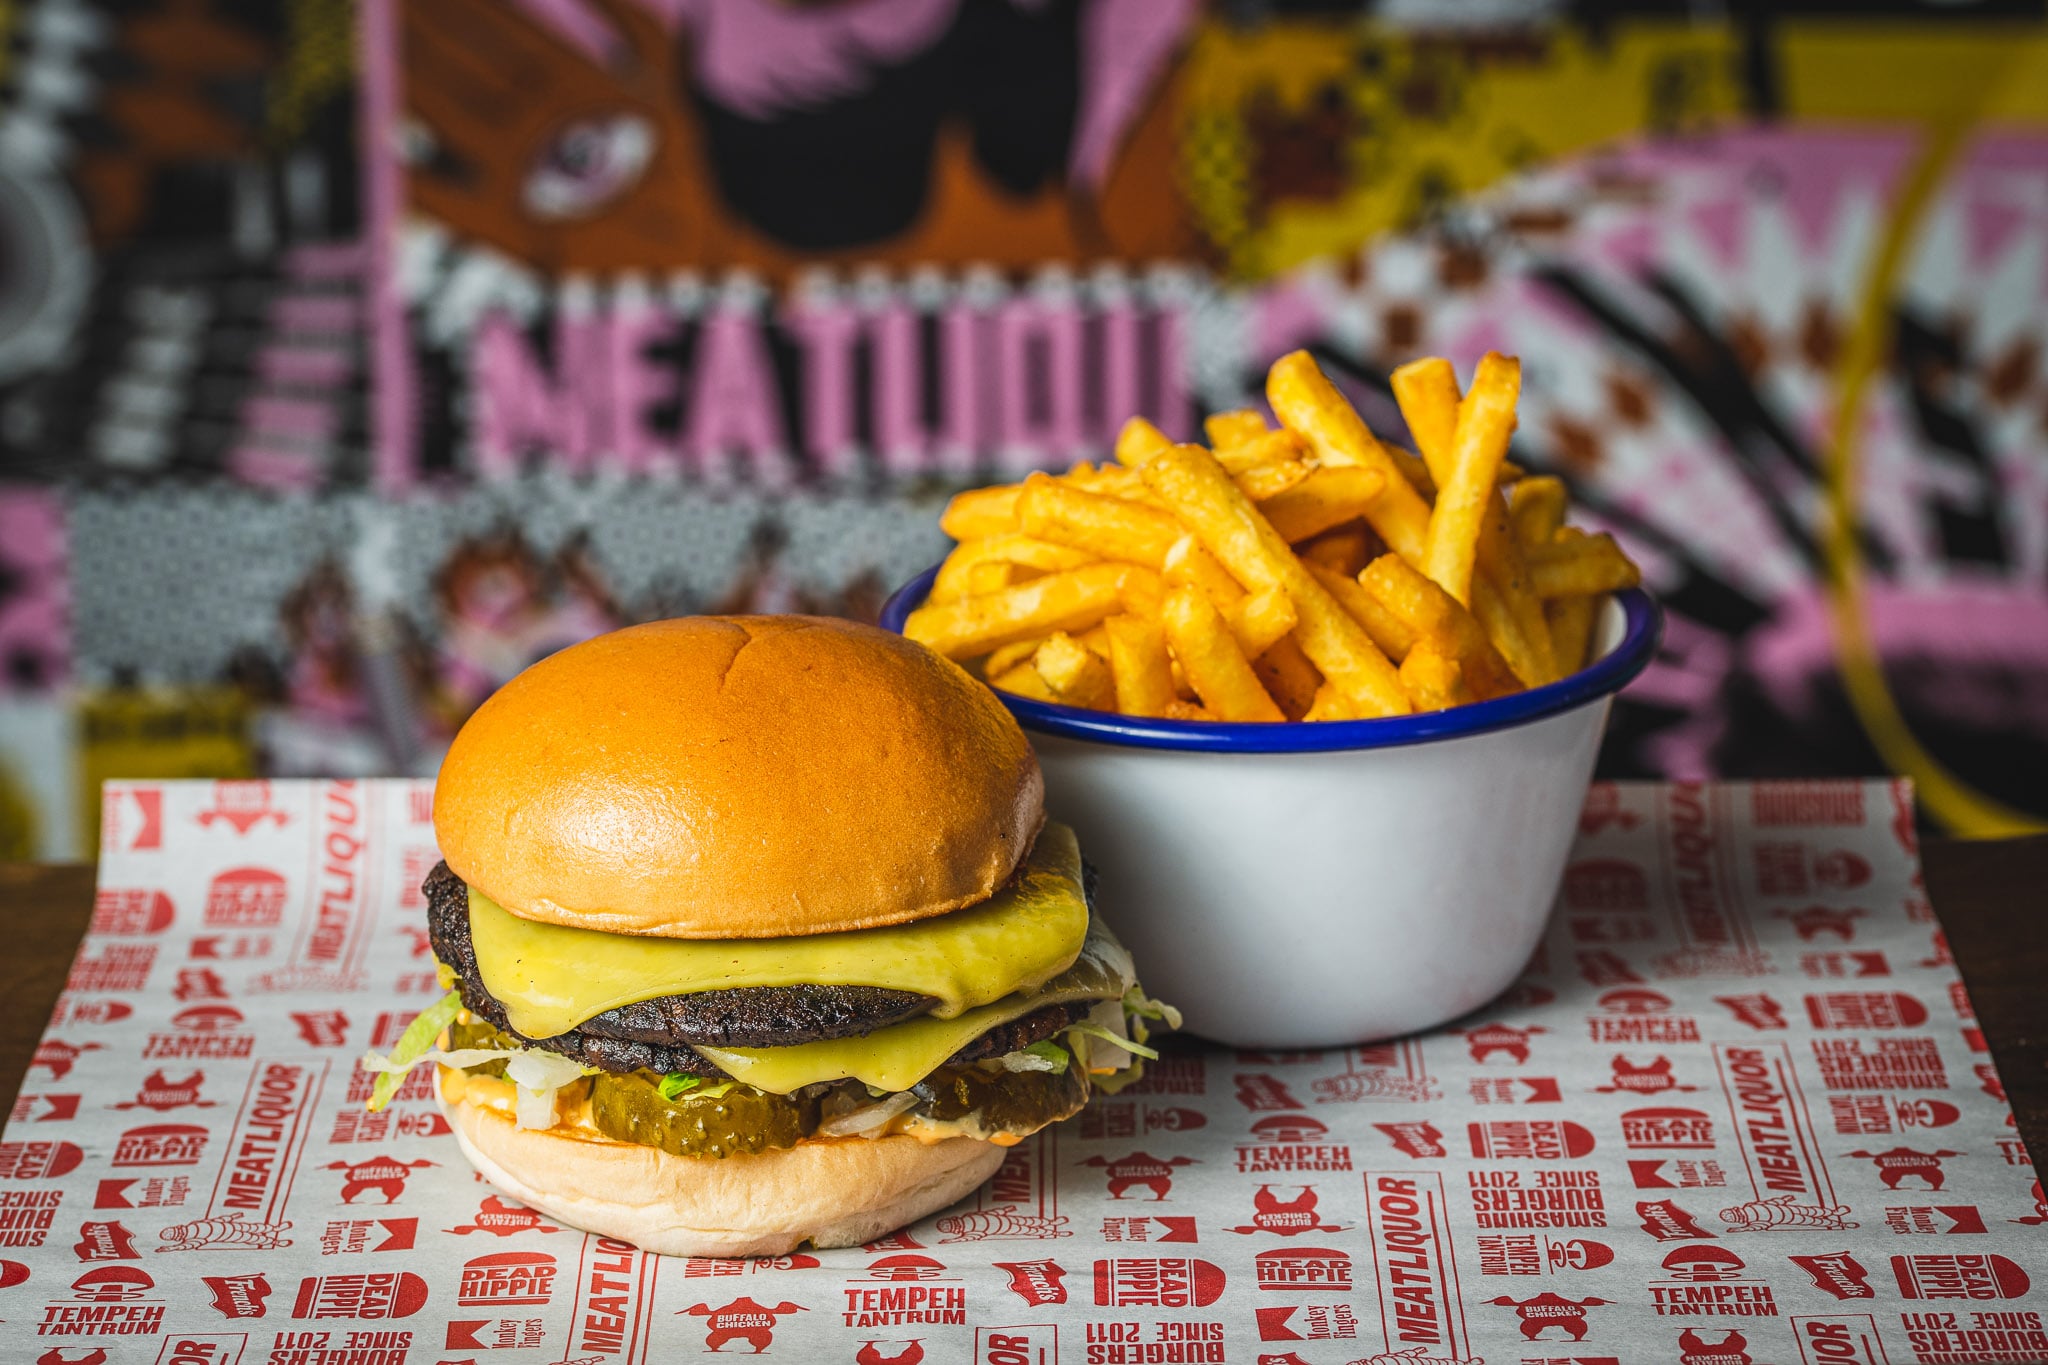 MEATliquor – The original MEAT. Come hungry, leave wobbly